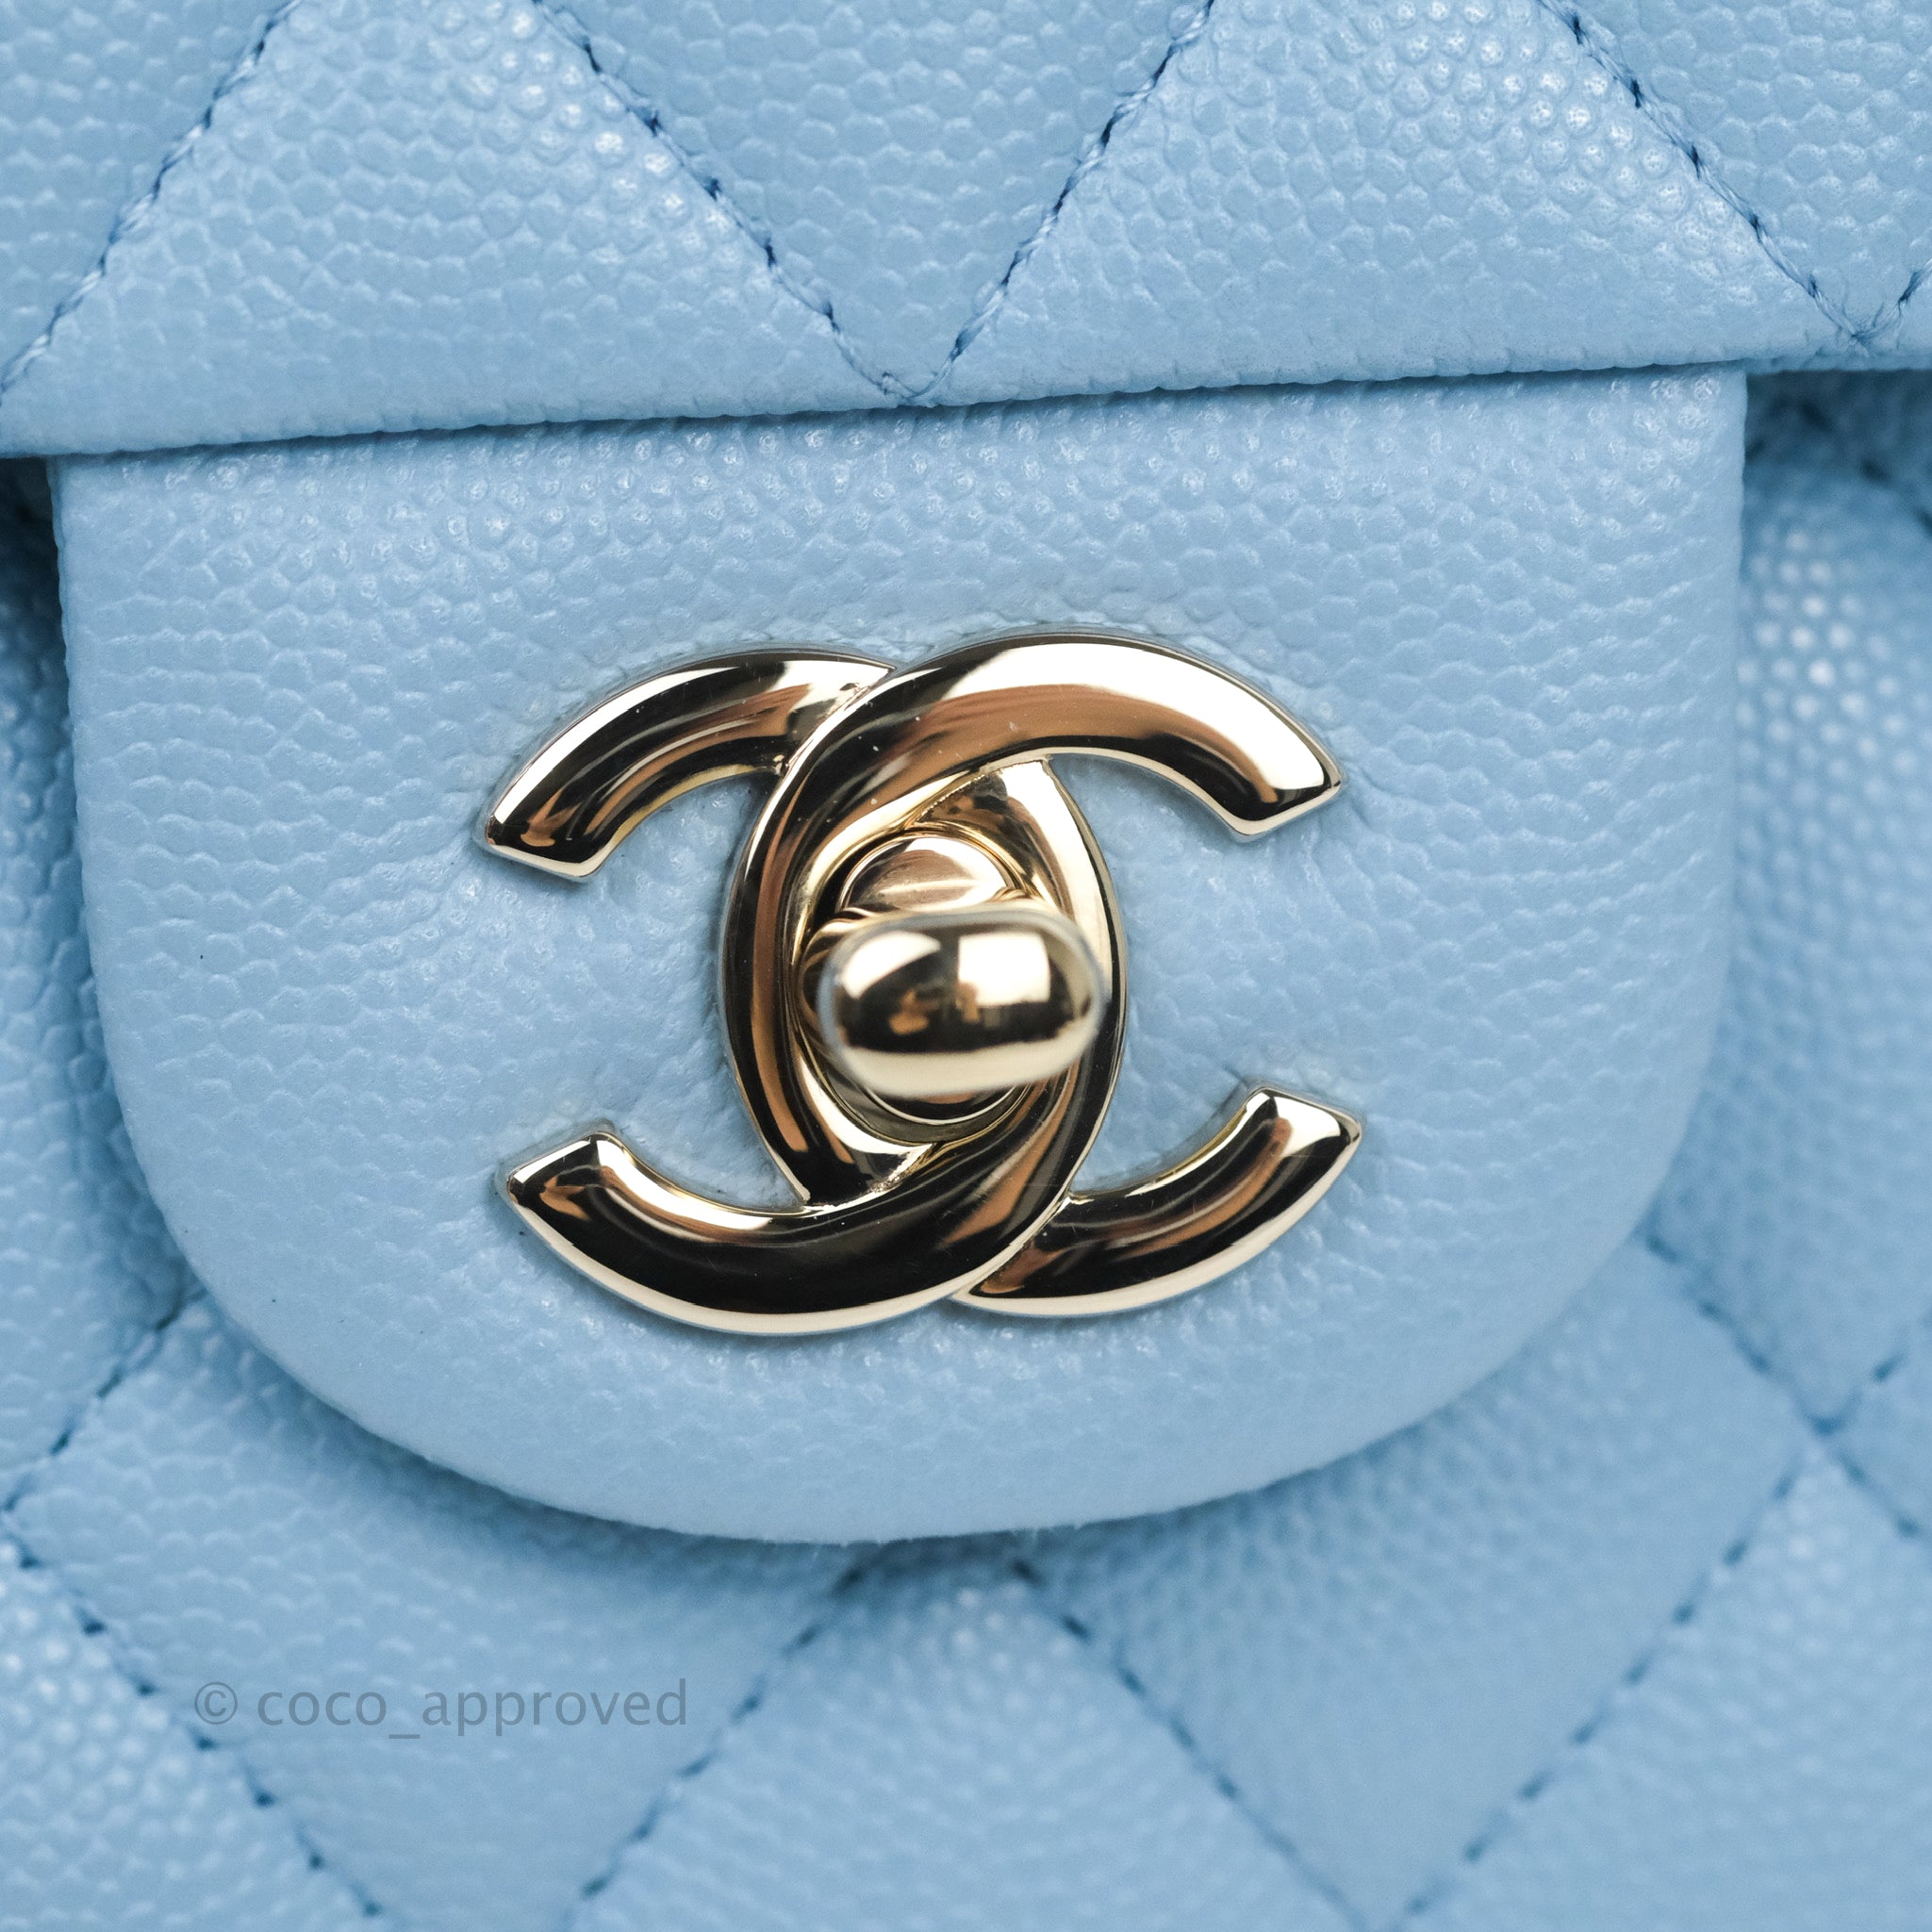 Chanel Small Classic Quilted Flap Light Blue Caviar Gold Hardware